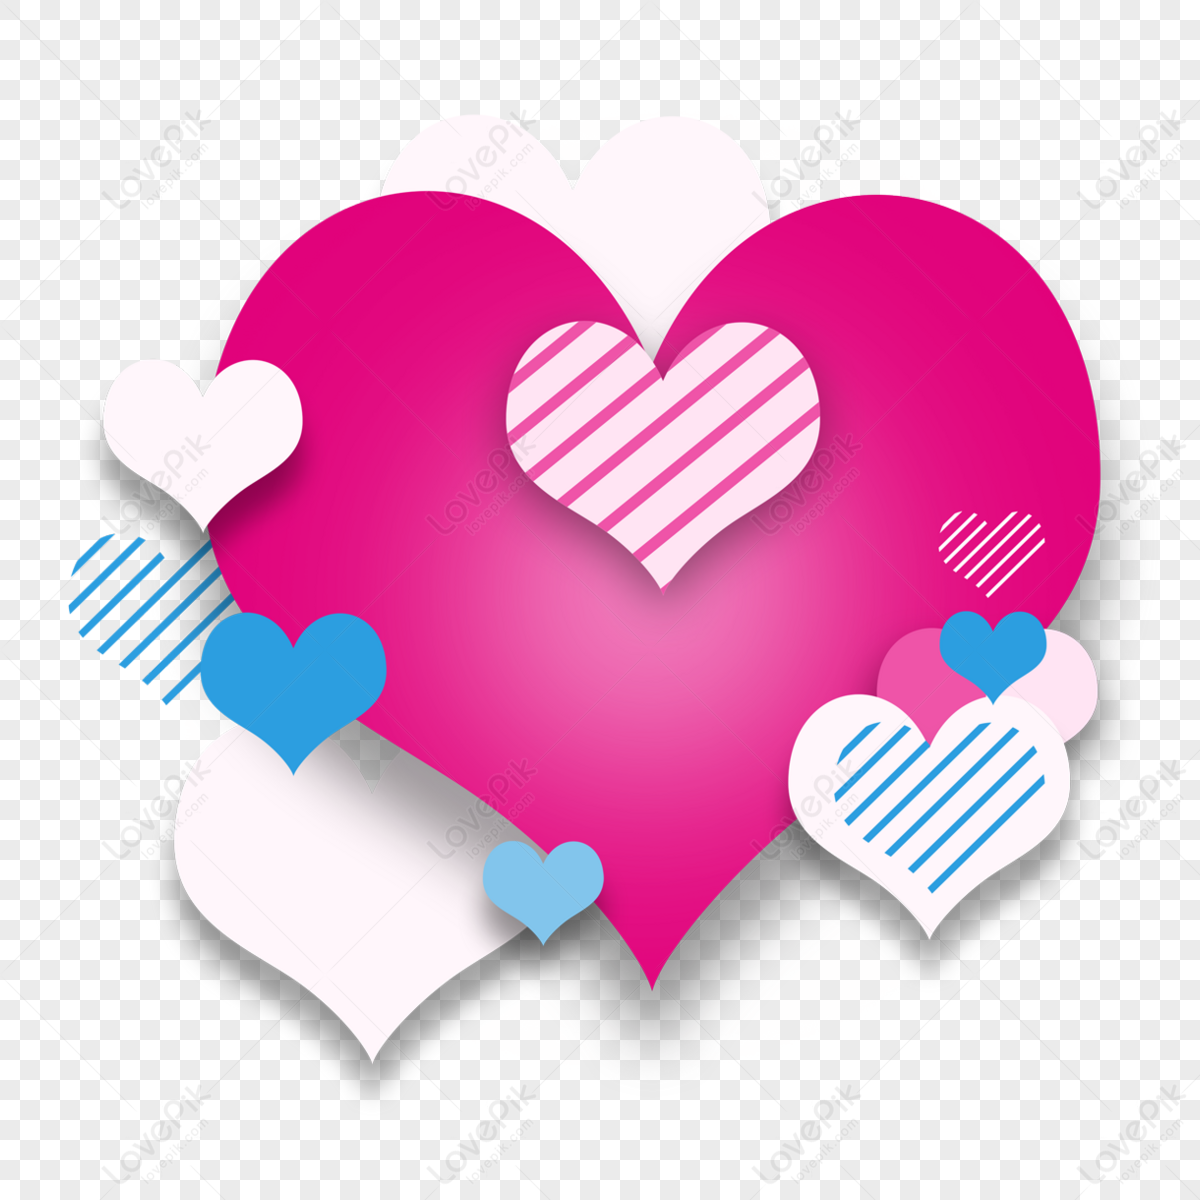 Free: Sticker Paper Aesthetics Heart, love stickers transparent background  PNG clipart 